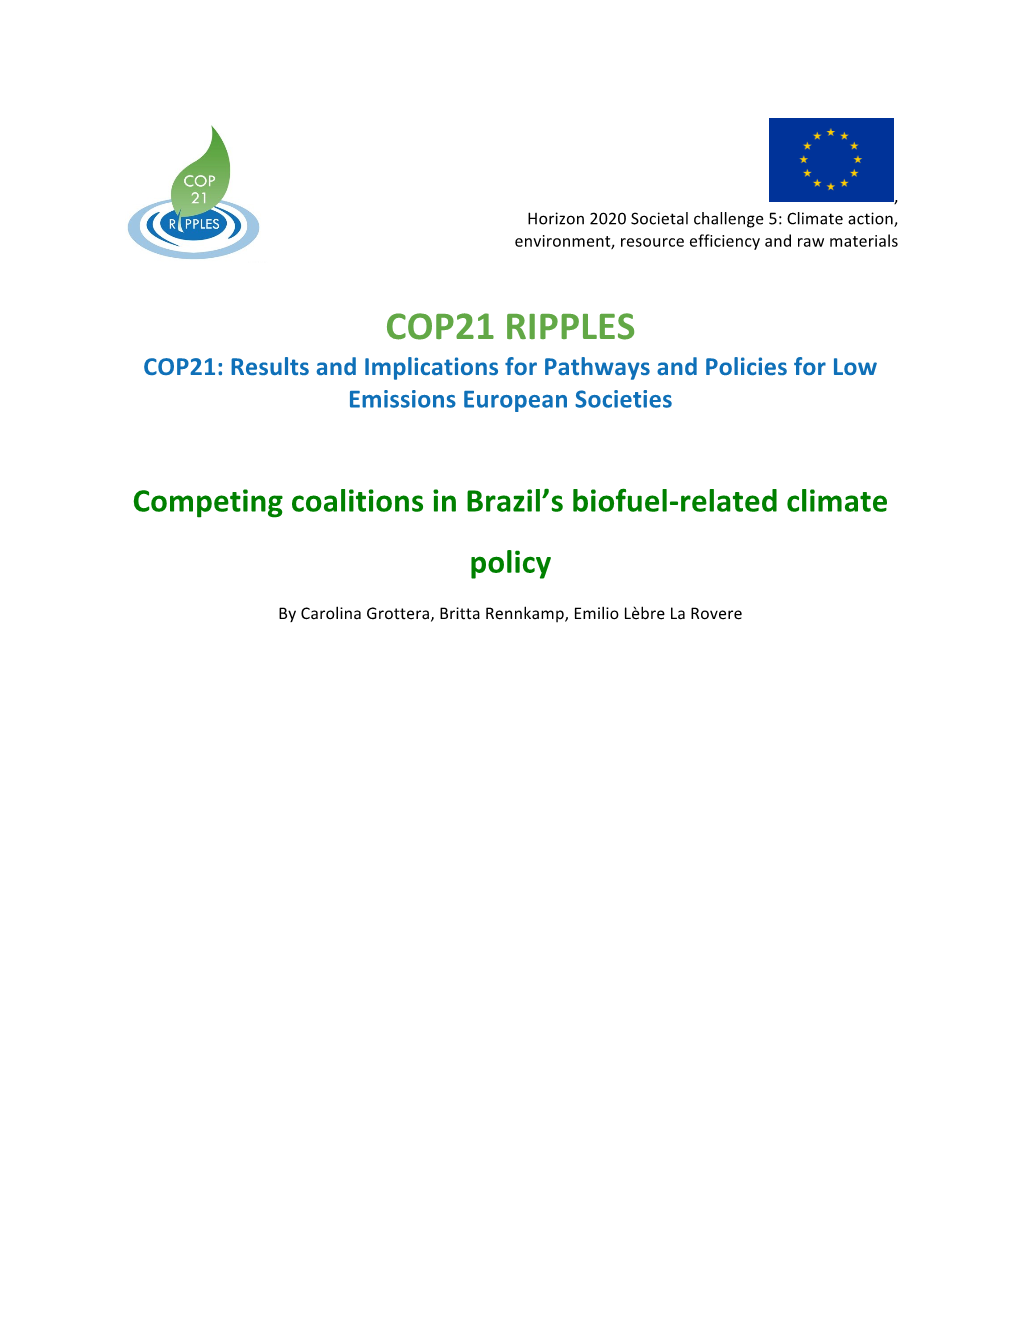 Competing Coalitions in Brazil's Biofuel‐Related